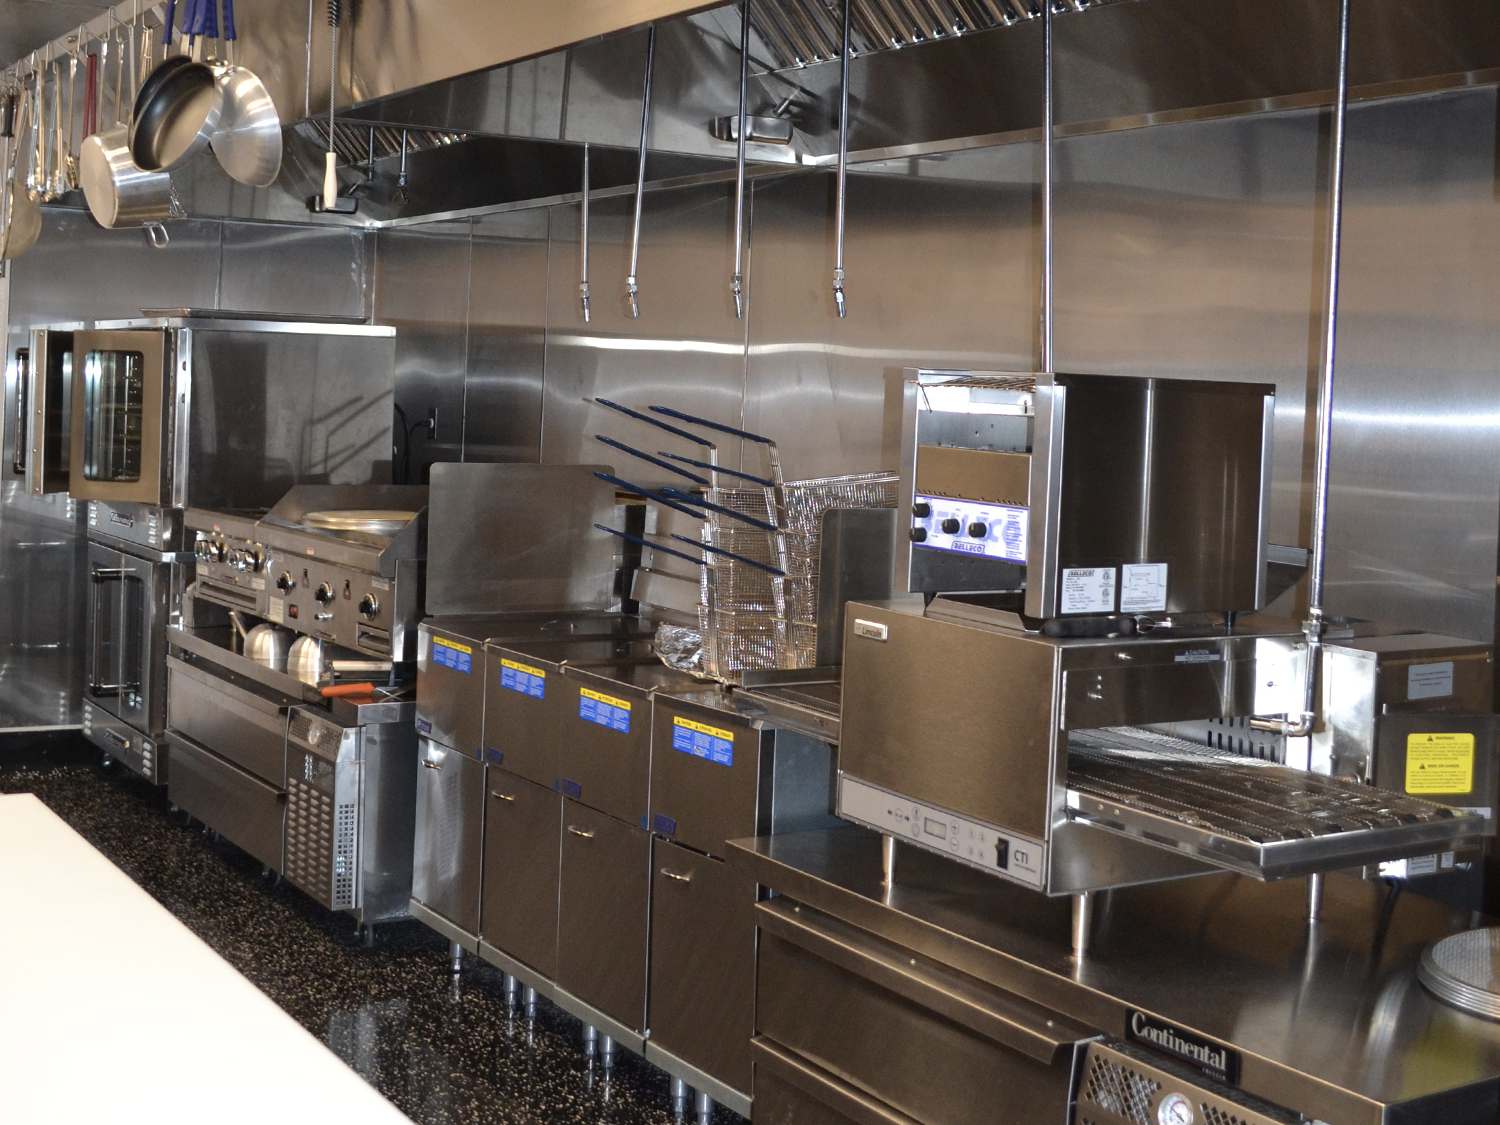 Kitchen Design Commercial Kitchen Equipment - Continental Refrigerator. Innovative Designs for your FoodService Needs